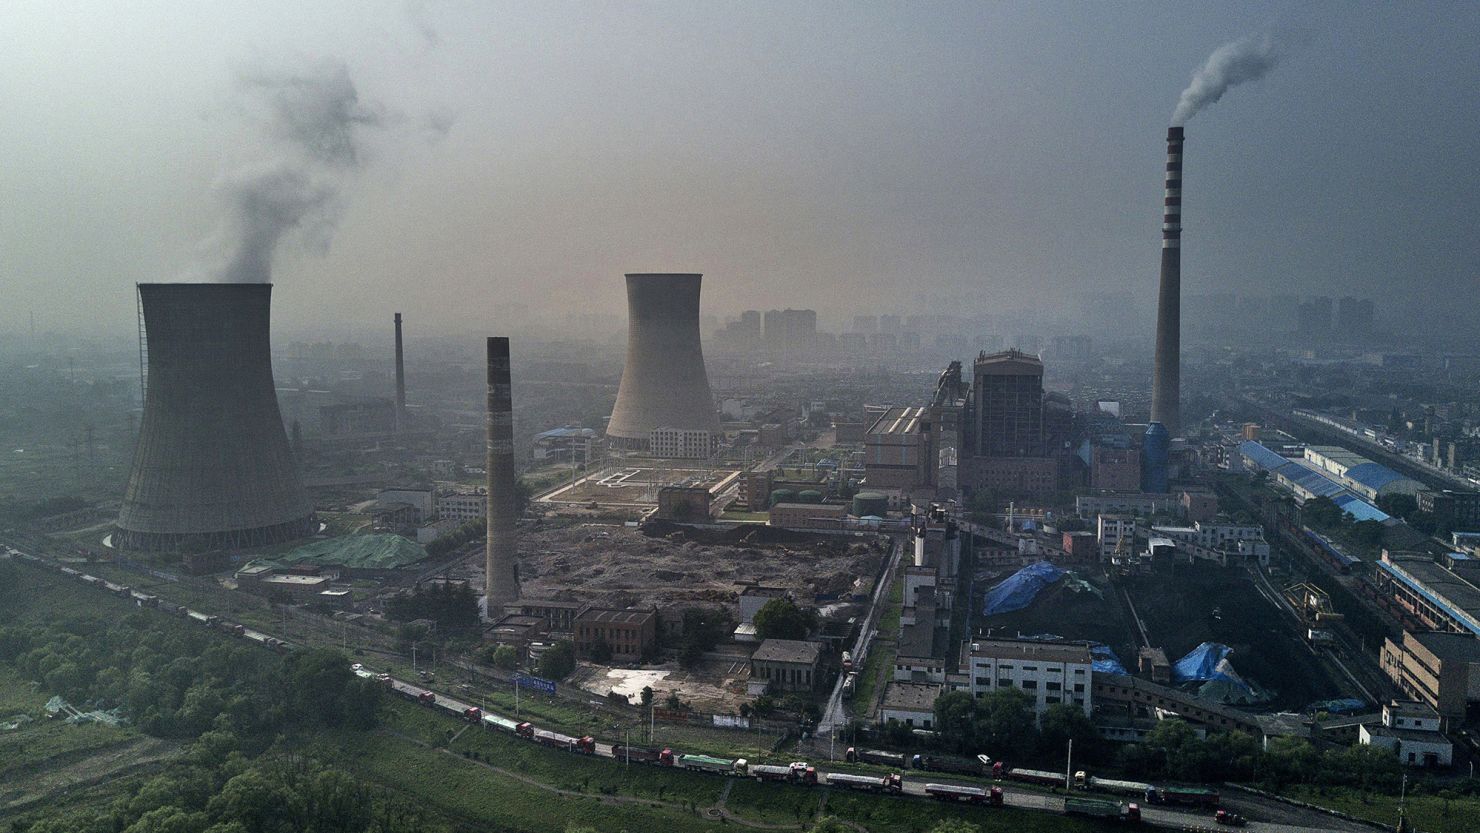 A coal-fired power plant on June 16, 2017 in Huainan, Anhui province, China.